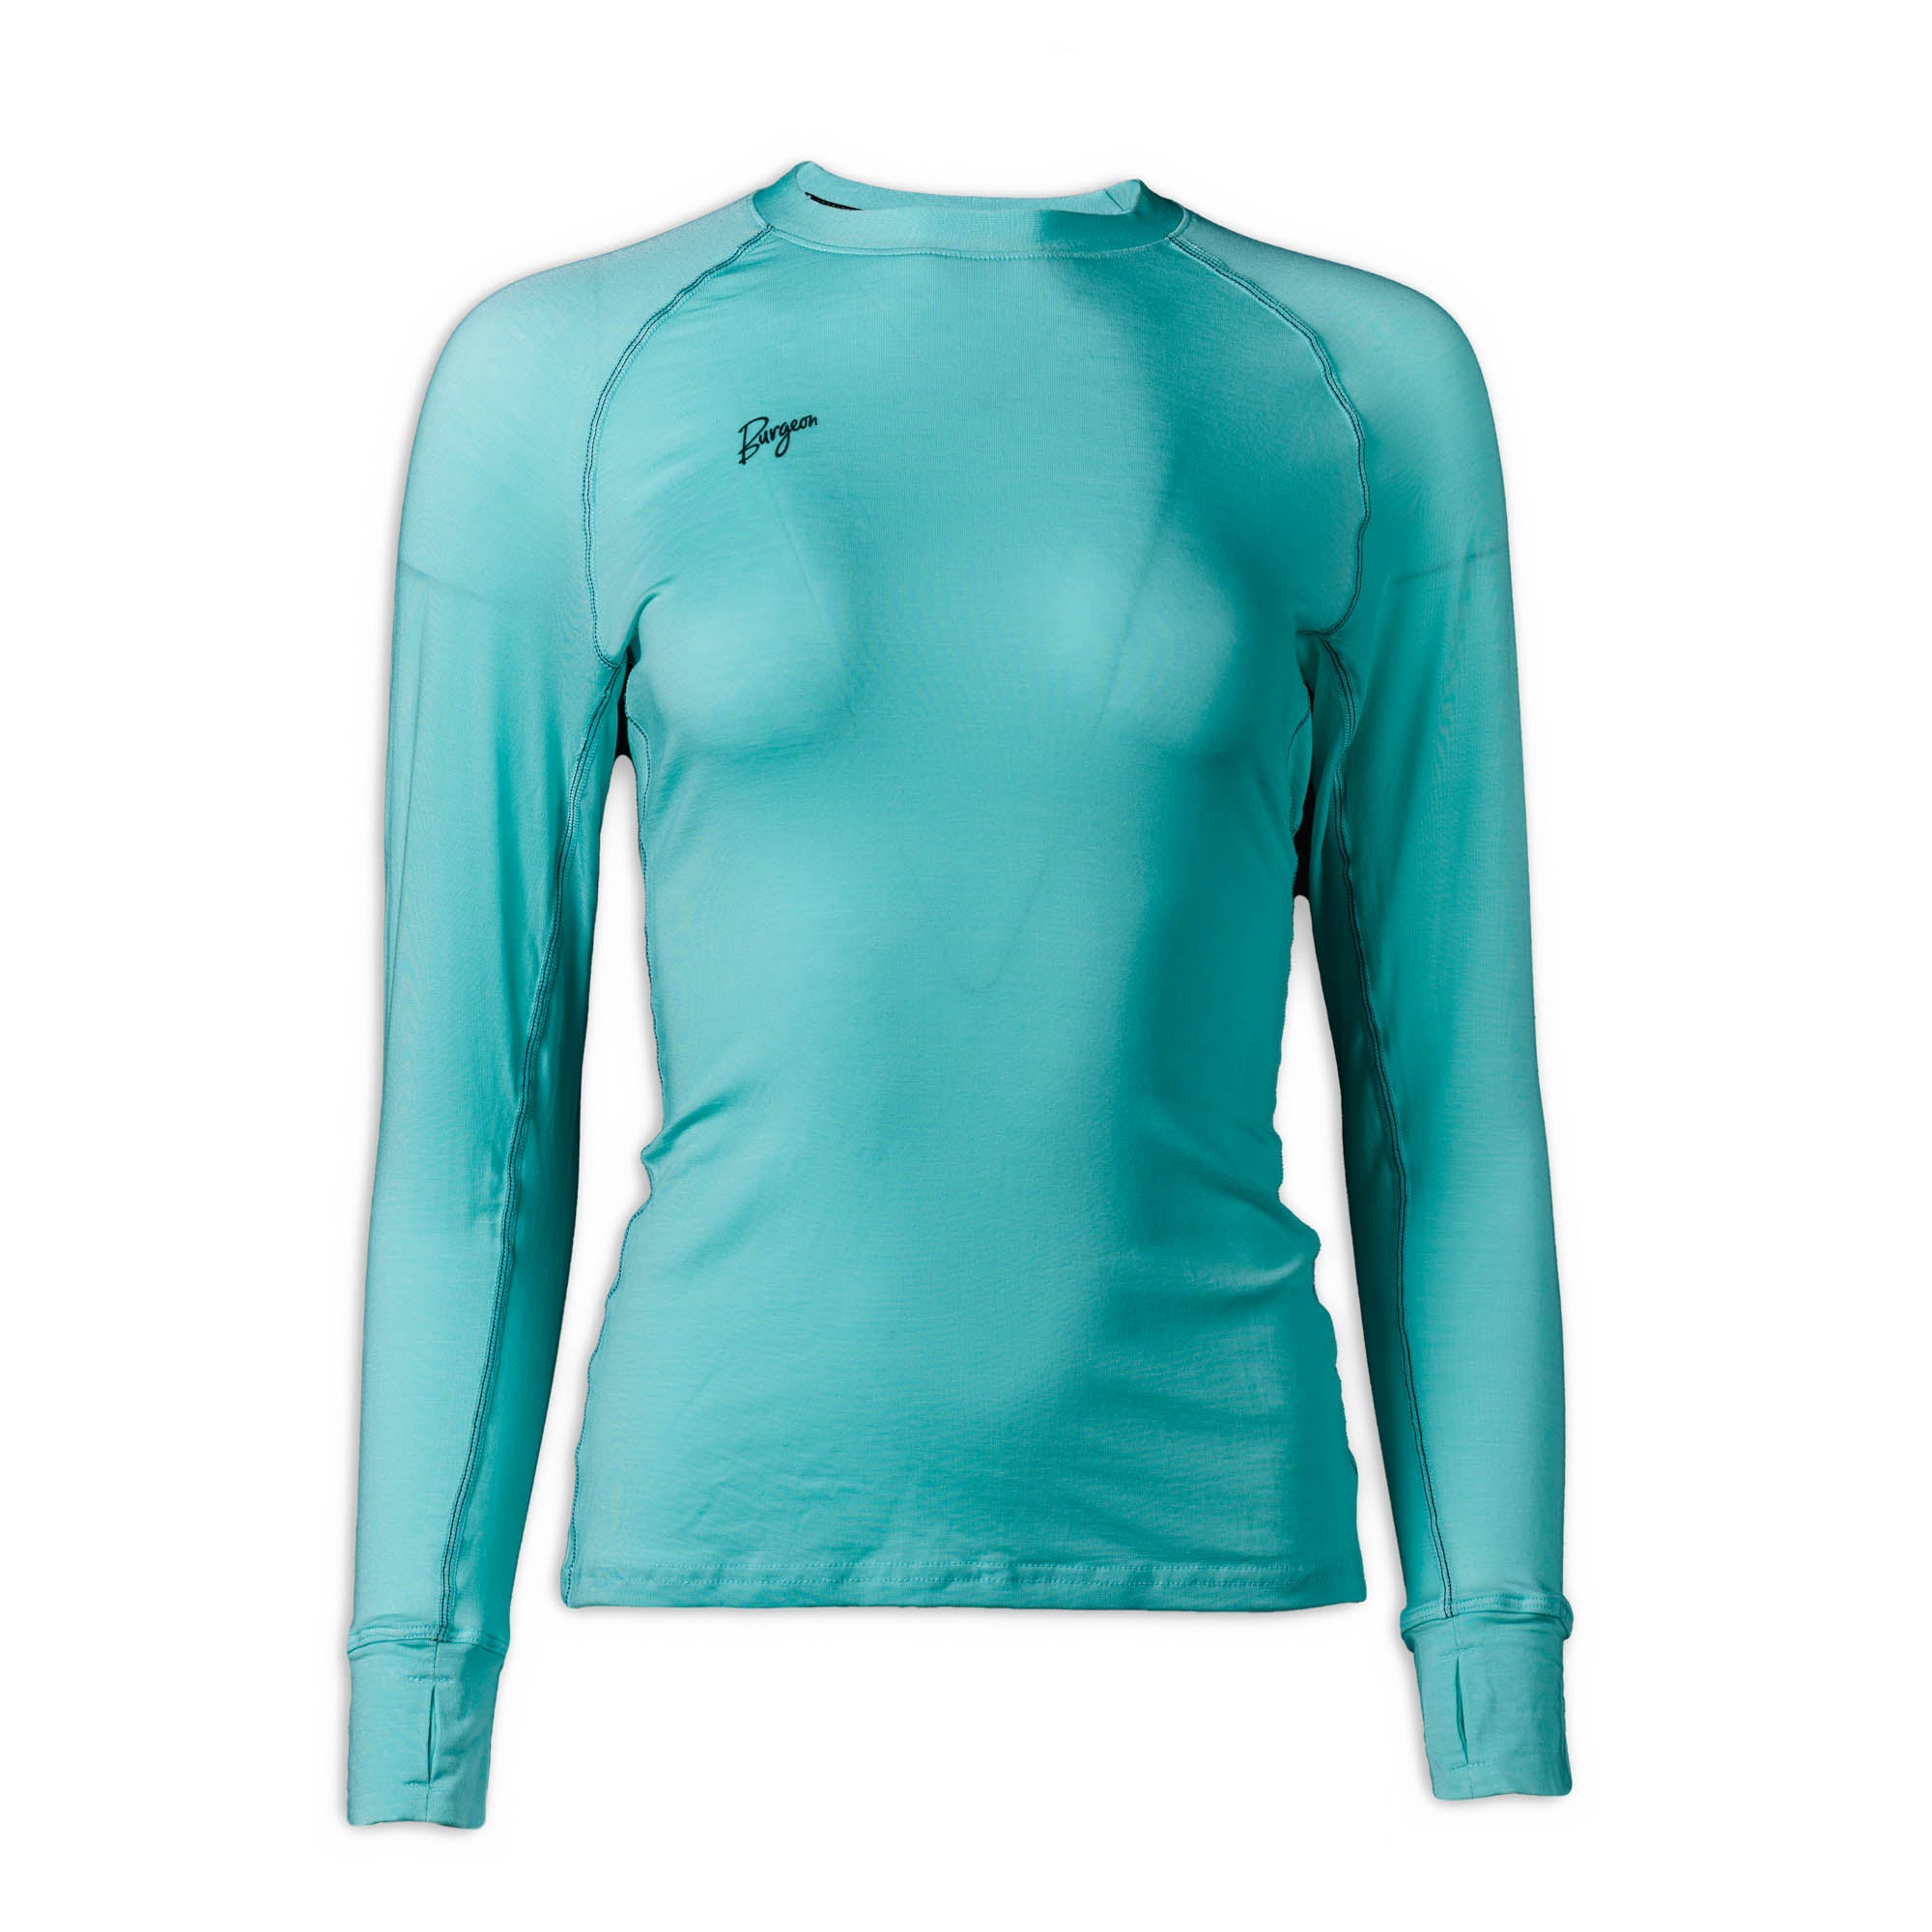 Aquamarine long-sleeved shirt with small logo above chest